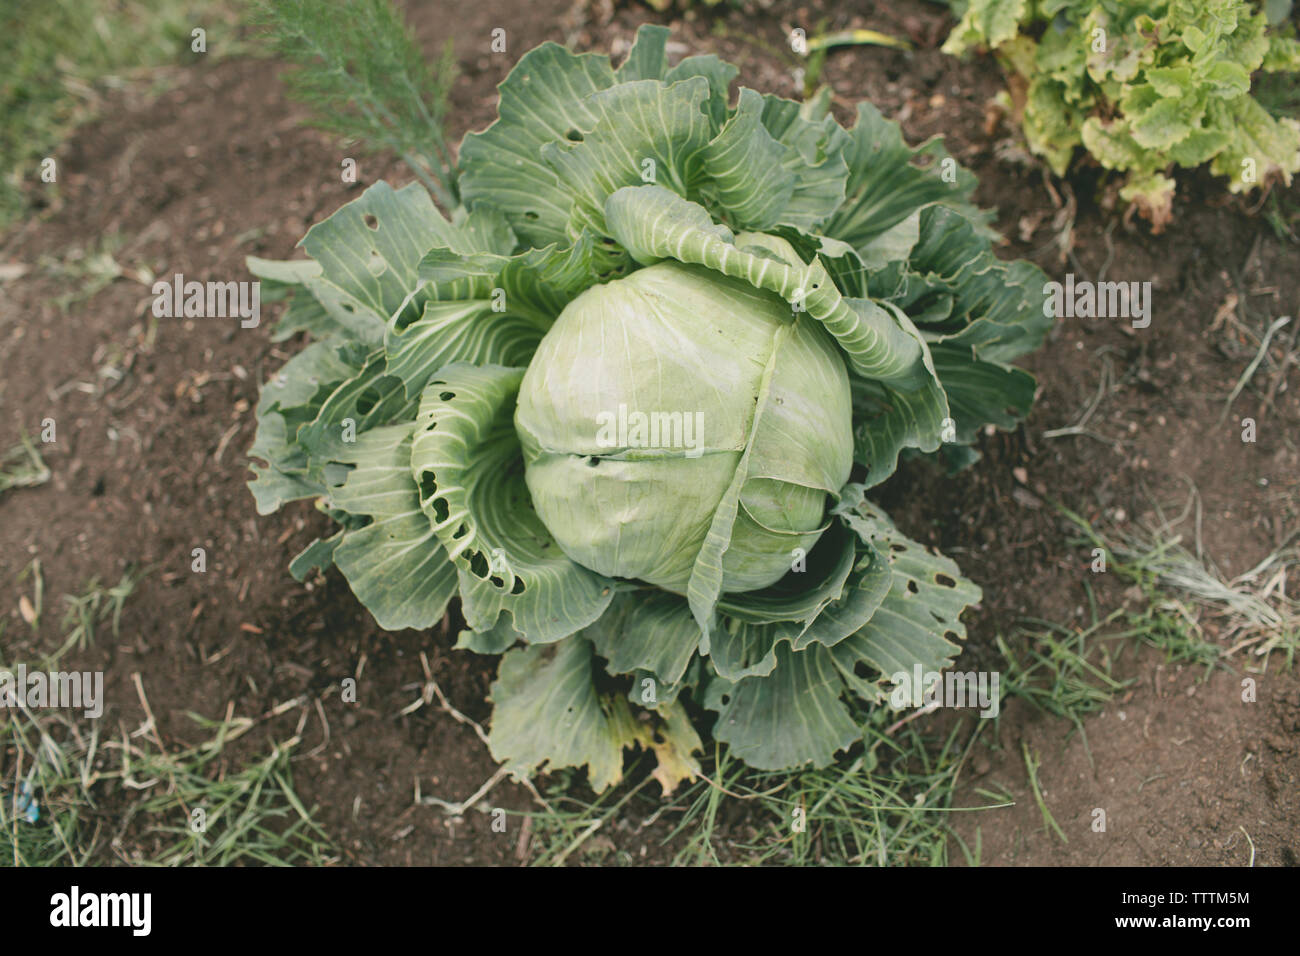 Overhead view of green cabbage growing at vegetable garden Stock Photo